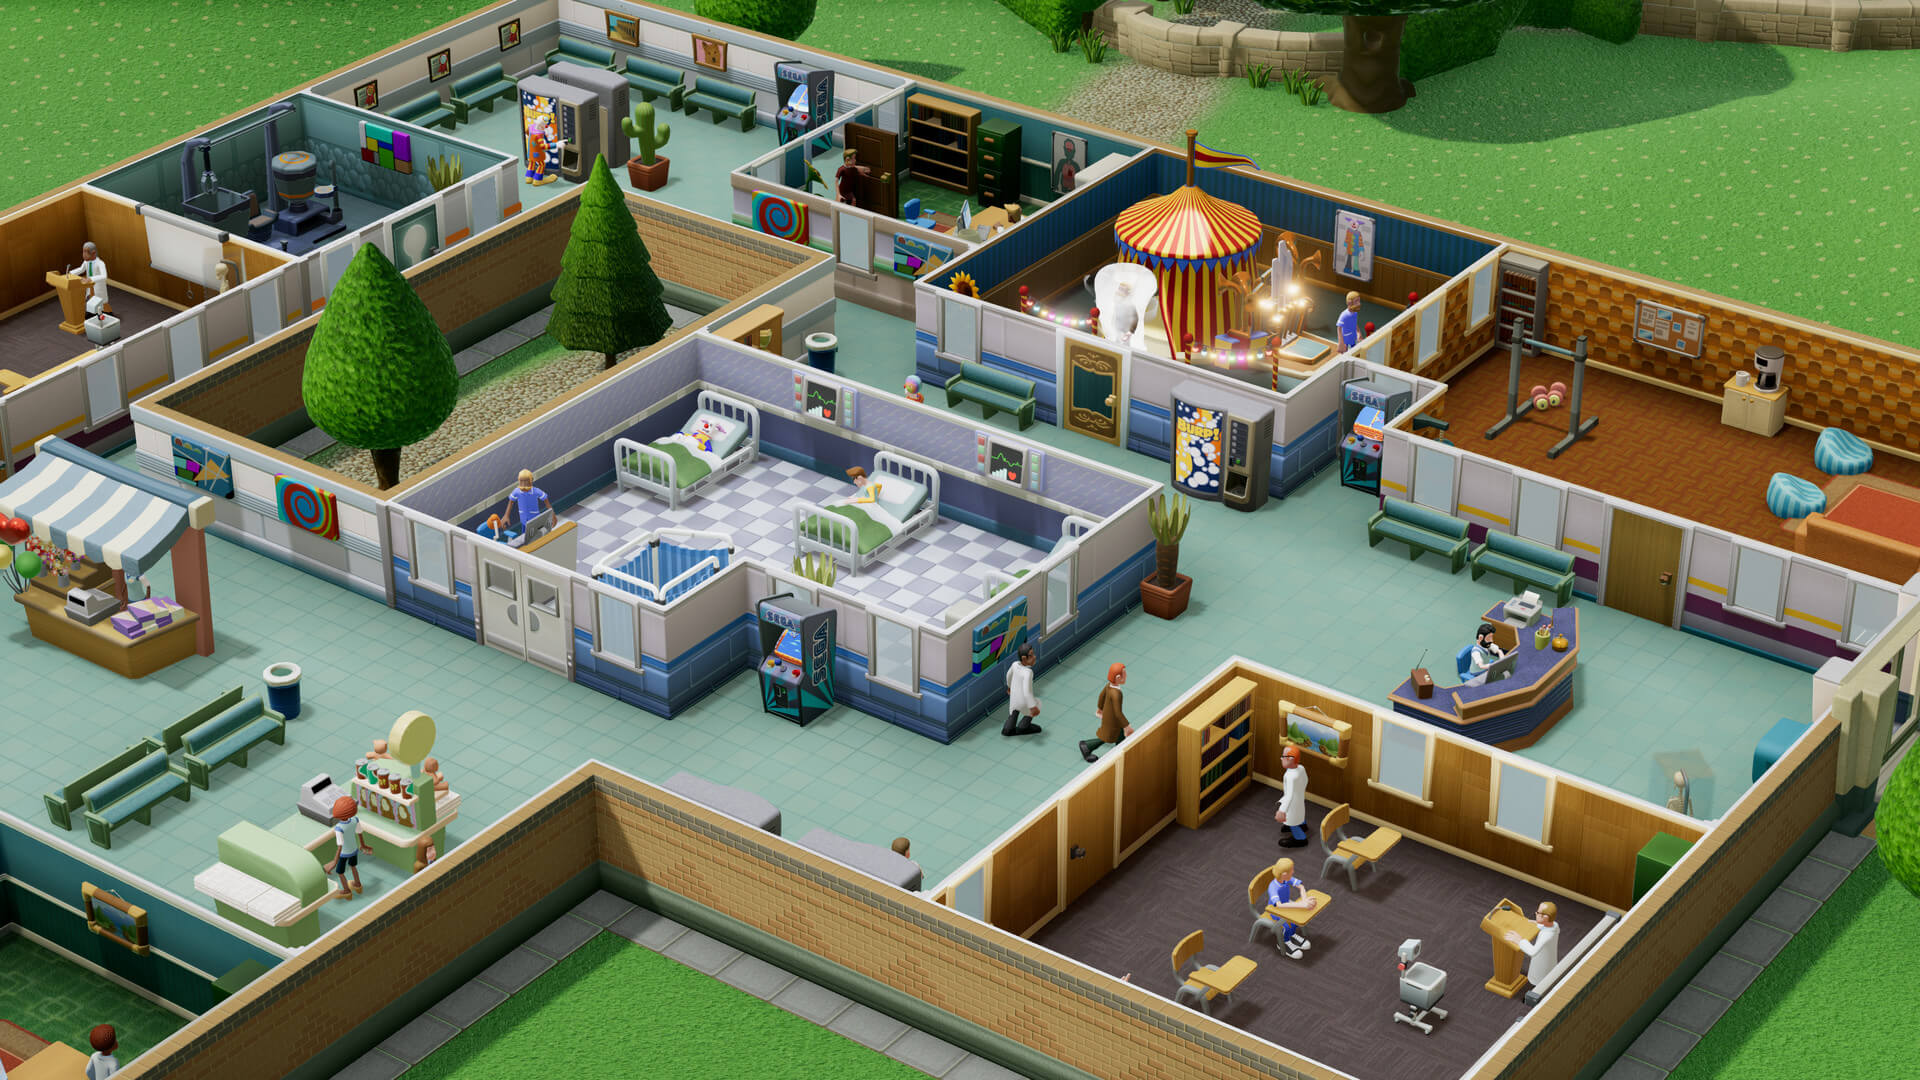 download free point hospital